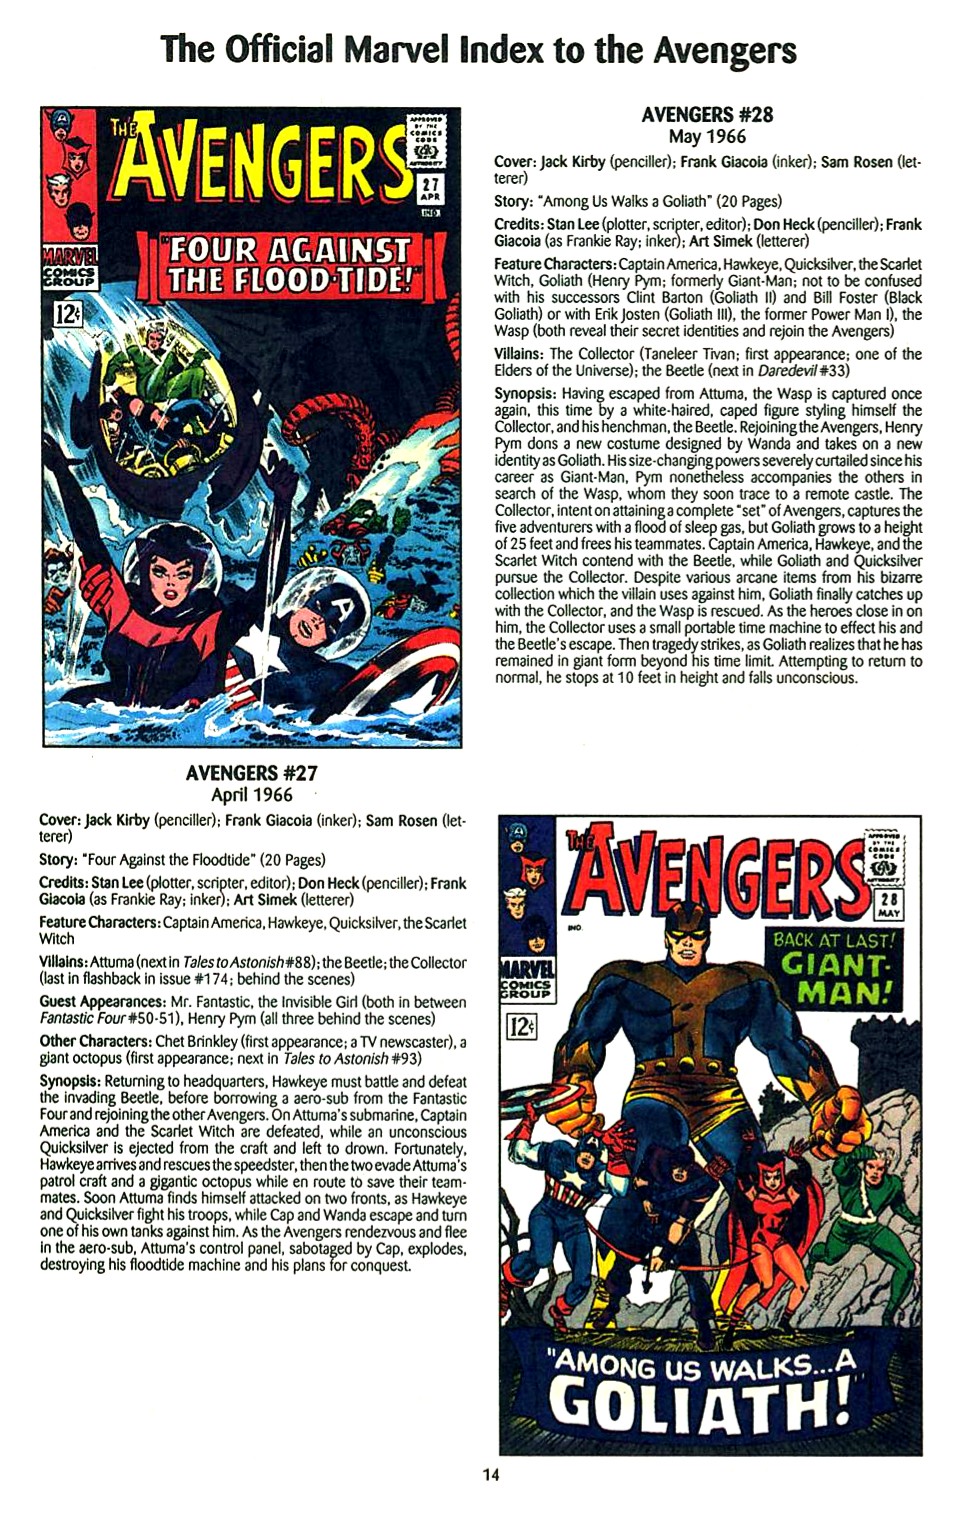 Read online The Official Marvel Index to the Avengers comic -  Issue #1 - 16